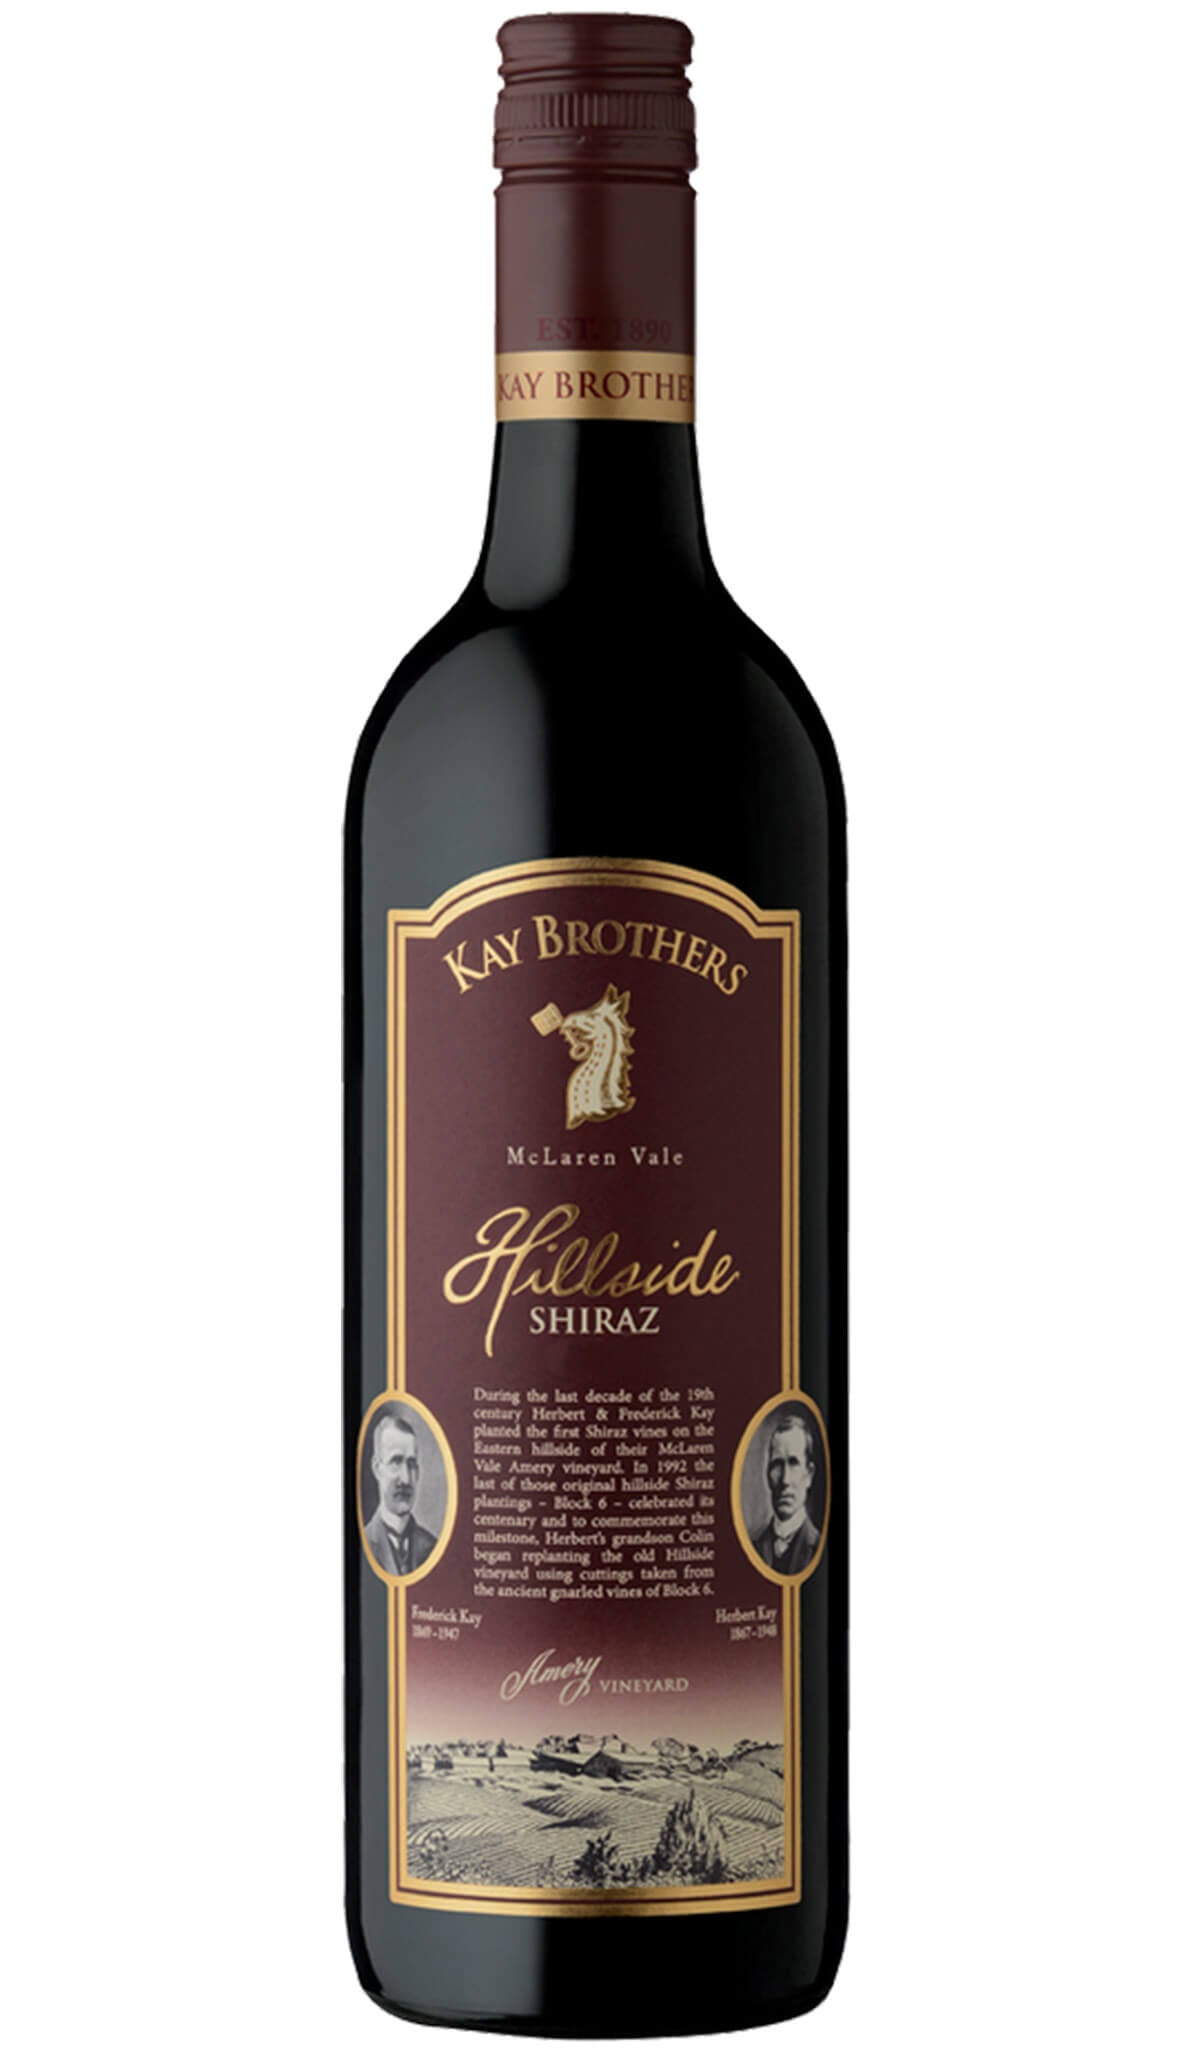 Find out more, explore the range and buy Kay Brothers Hillside Shiraz 2020 (McLaren Vale) available online at Wine Sellers Direct - Australia's independent liquor specialists.